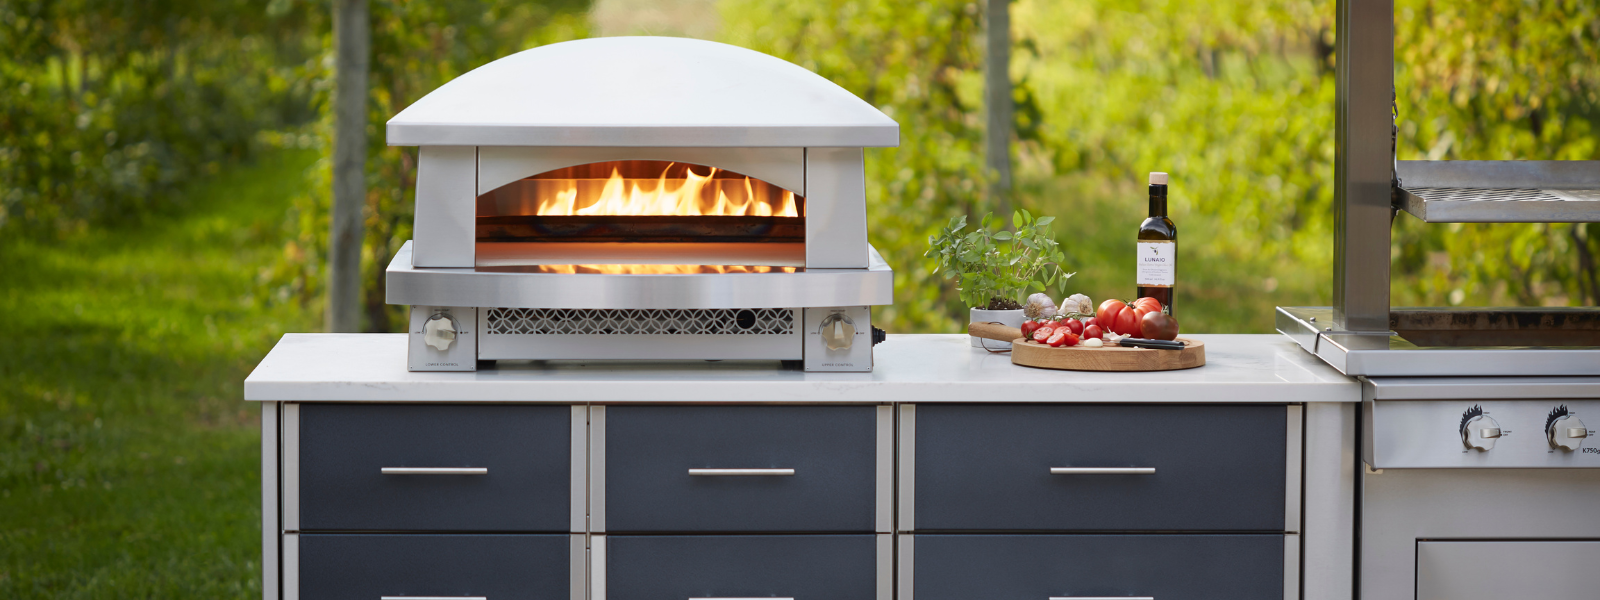 Kalamazoo pizza ovens - available from Kitchen in the Garden